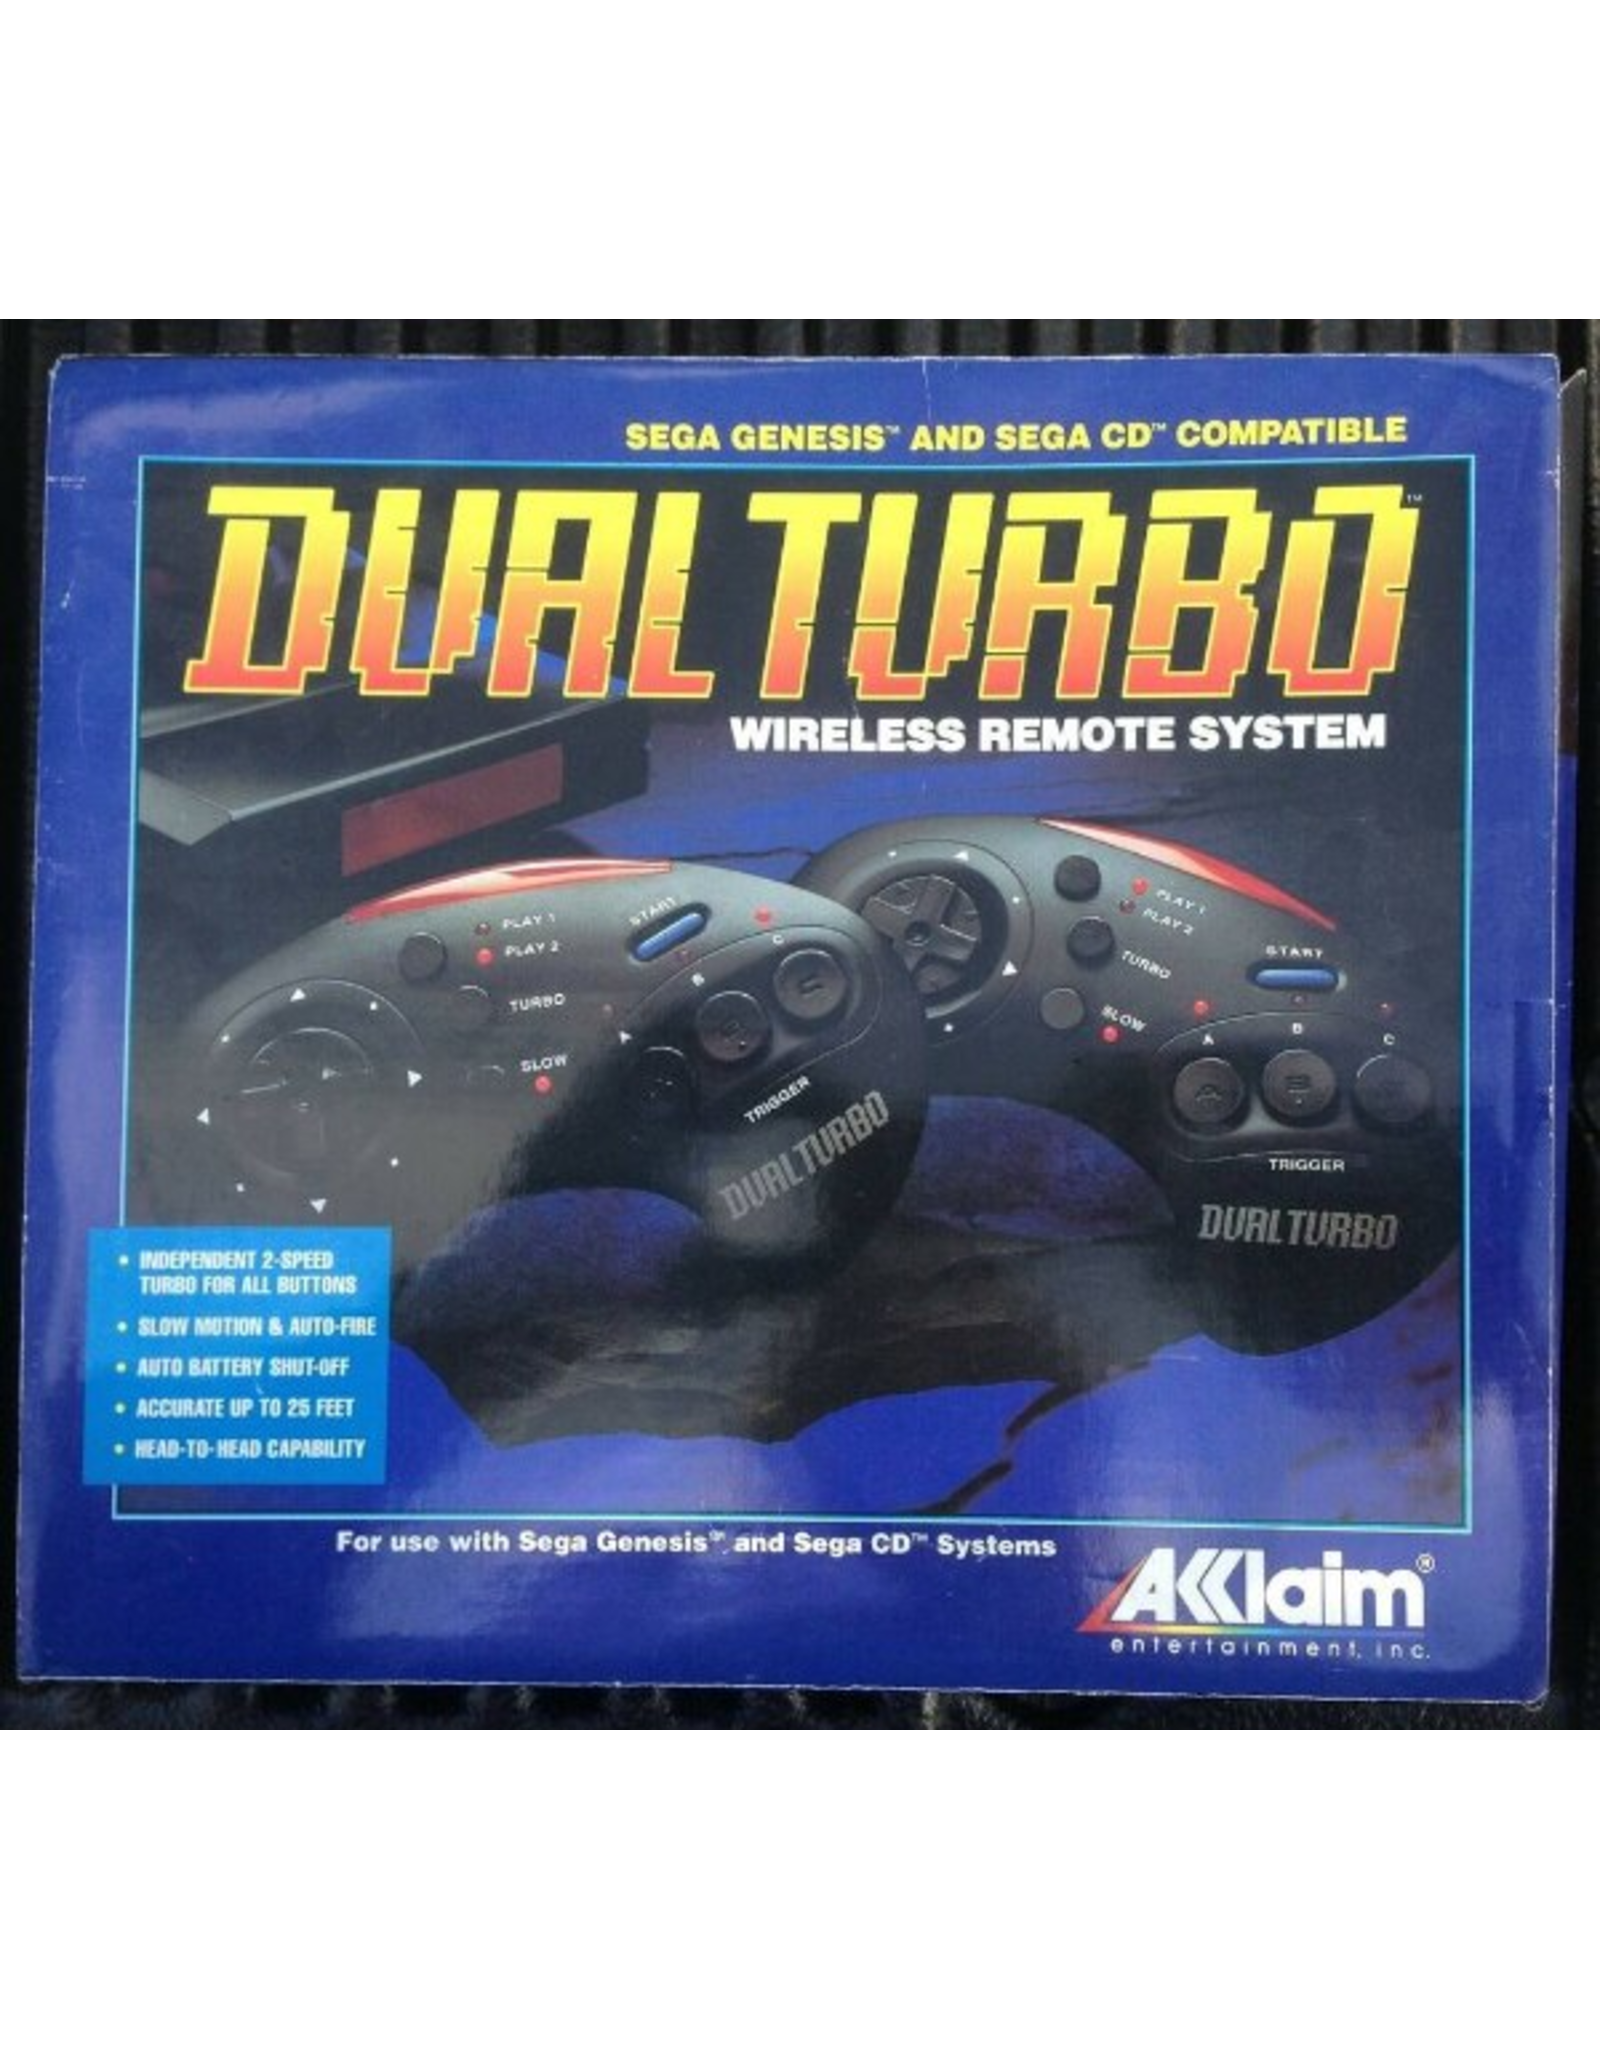 Sega Genesis Dual Turbo Wireless Remote System (Used, Controllers/Receiver Only)